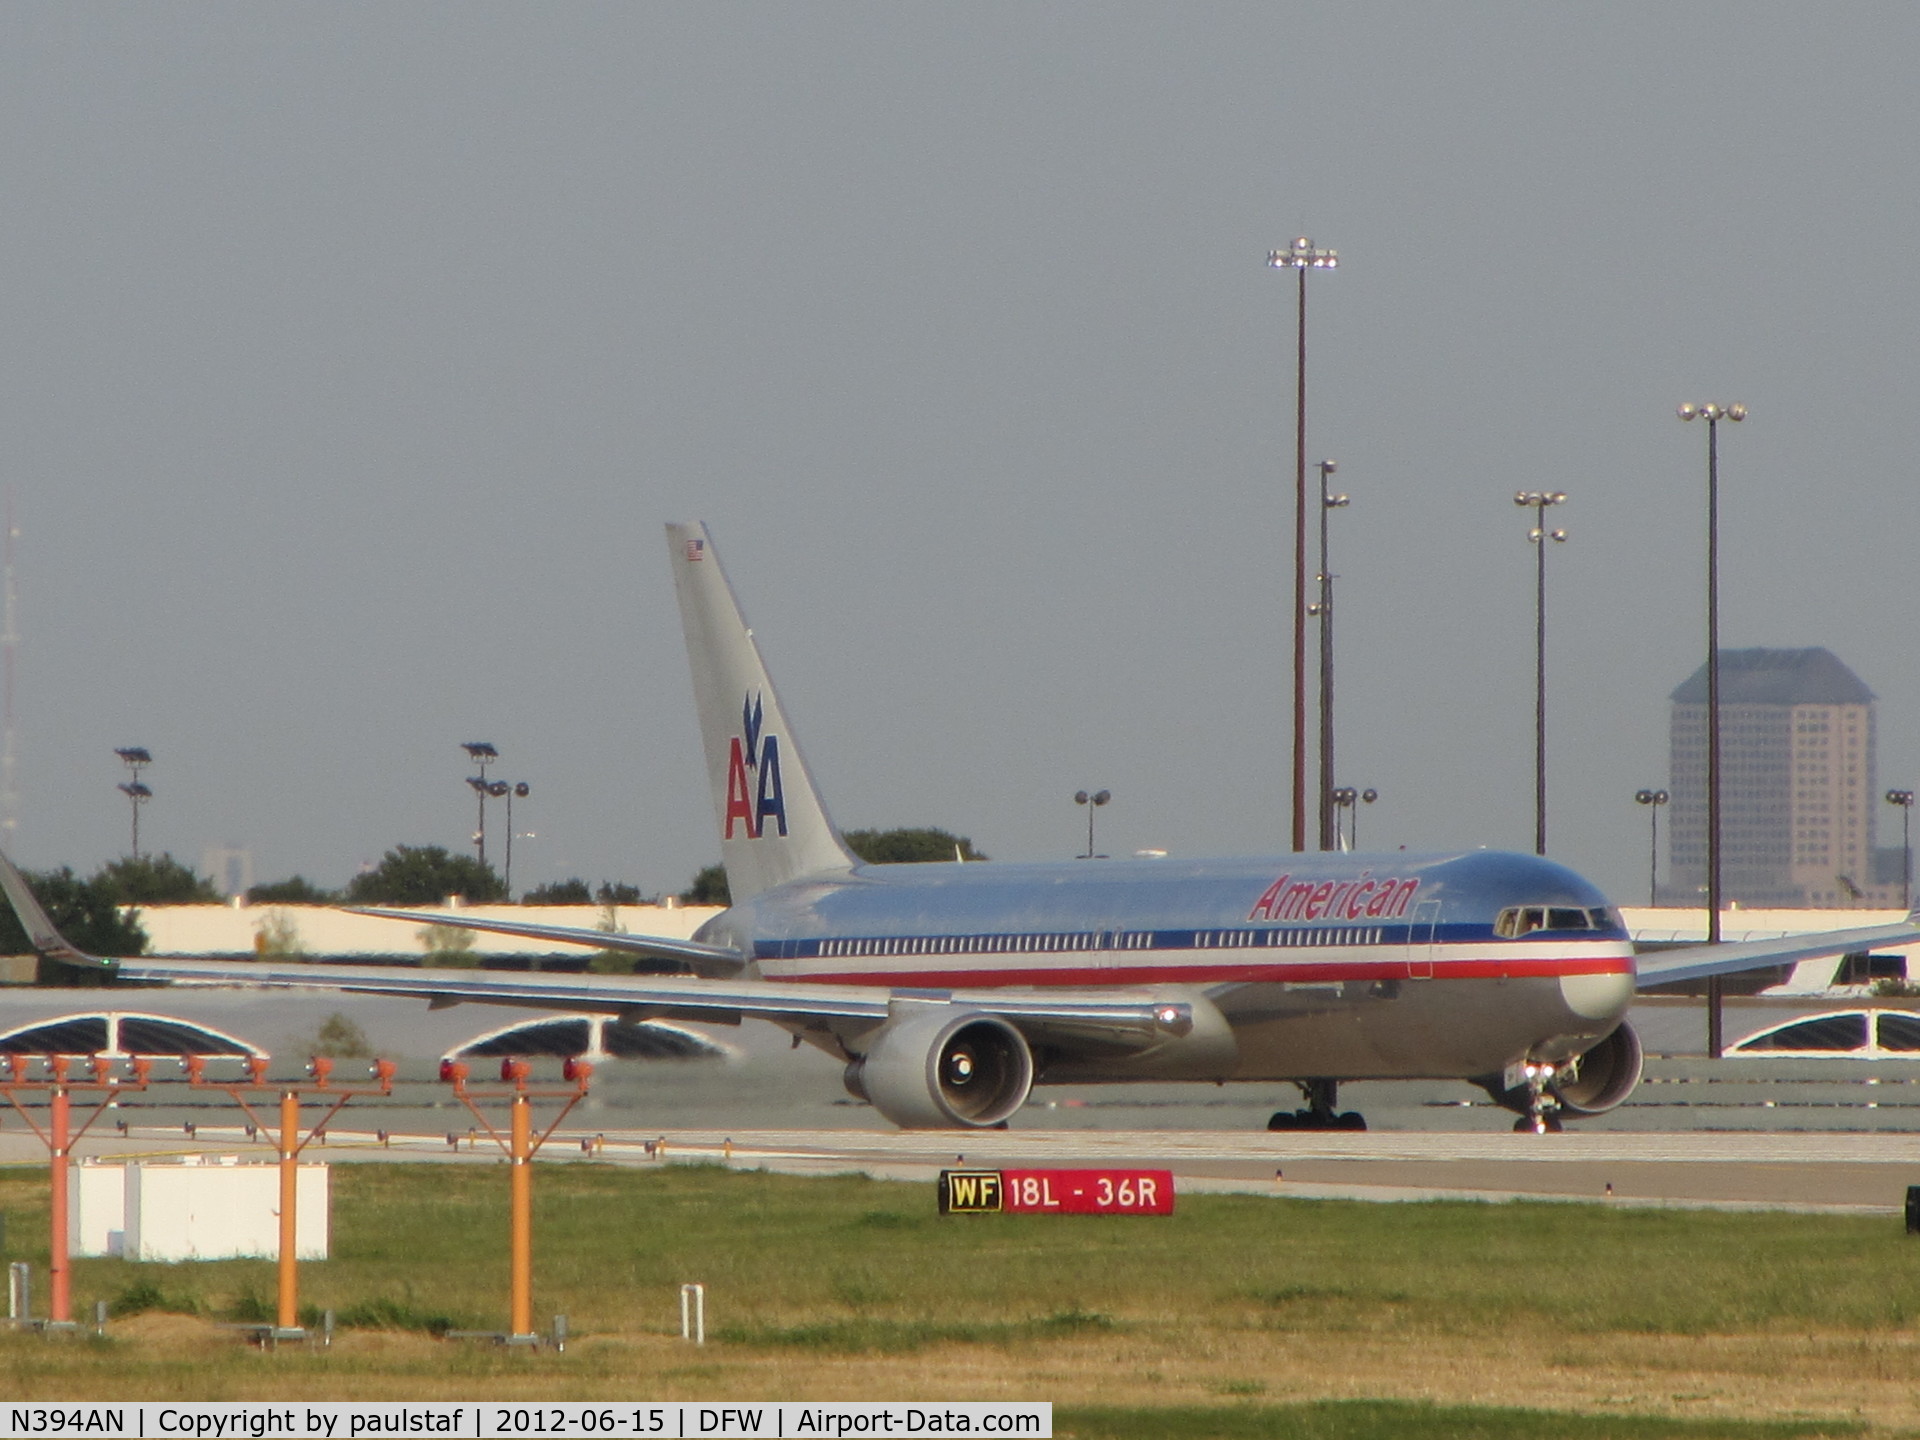 N394AN, 1998 Boeing 767-323/ER C/N 29431, Waiting to takeoff from runway 18L at DFW Airport